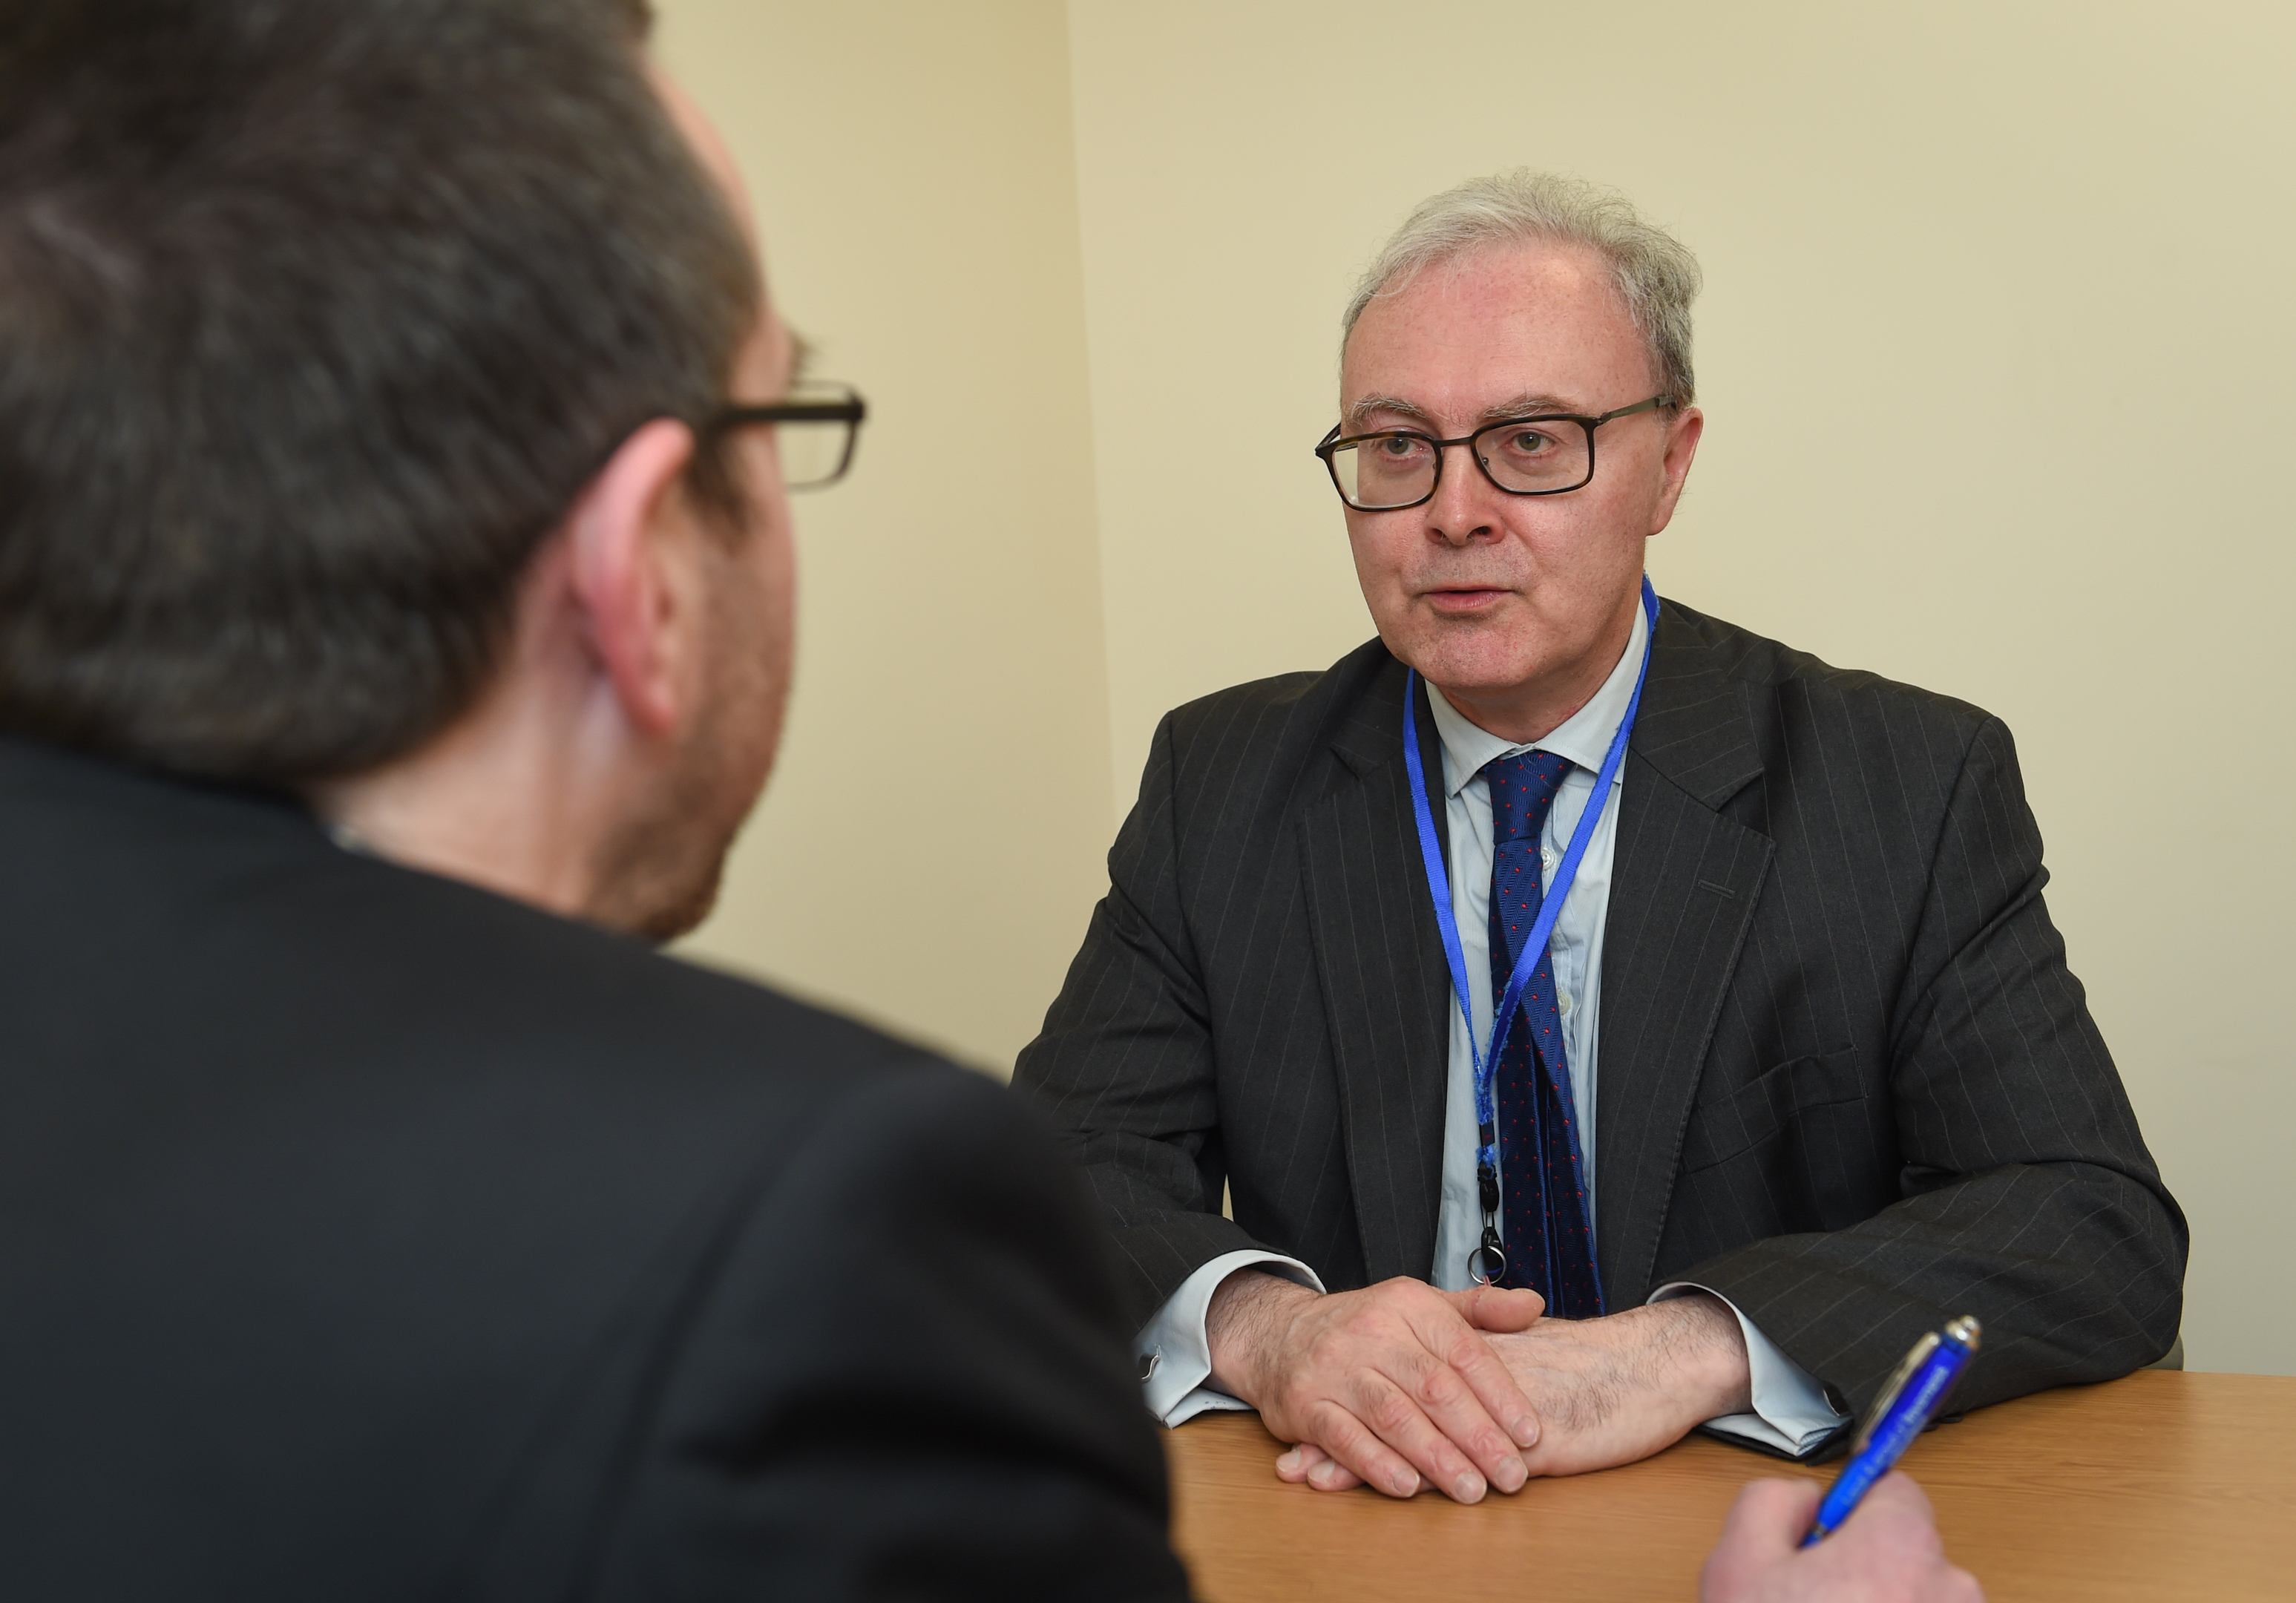 Pictures show Lord Advocate, James Wolffe in an interview with Press and Journal's Alistair Munro.